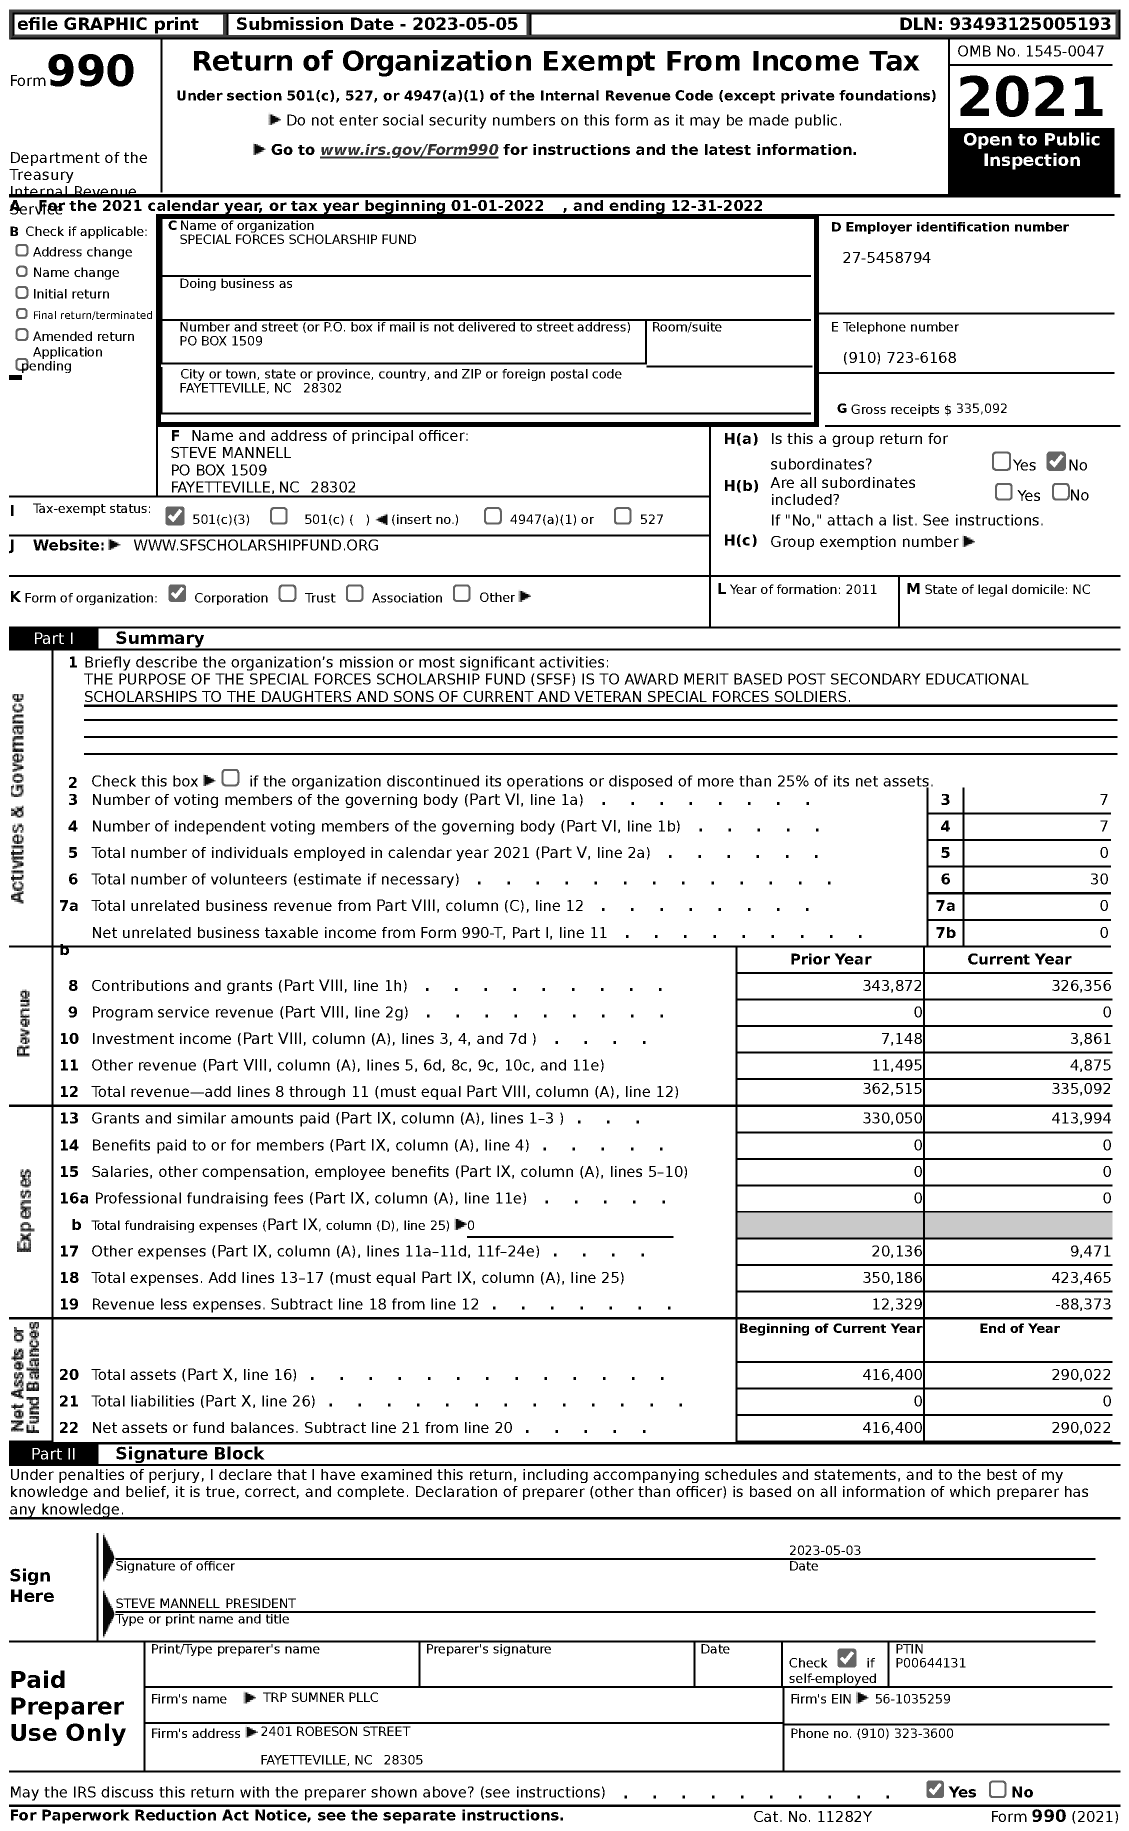 Image of first page of 2022 Form 990 for Special Forces Scholarship Fund